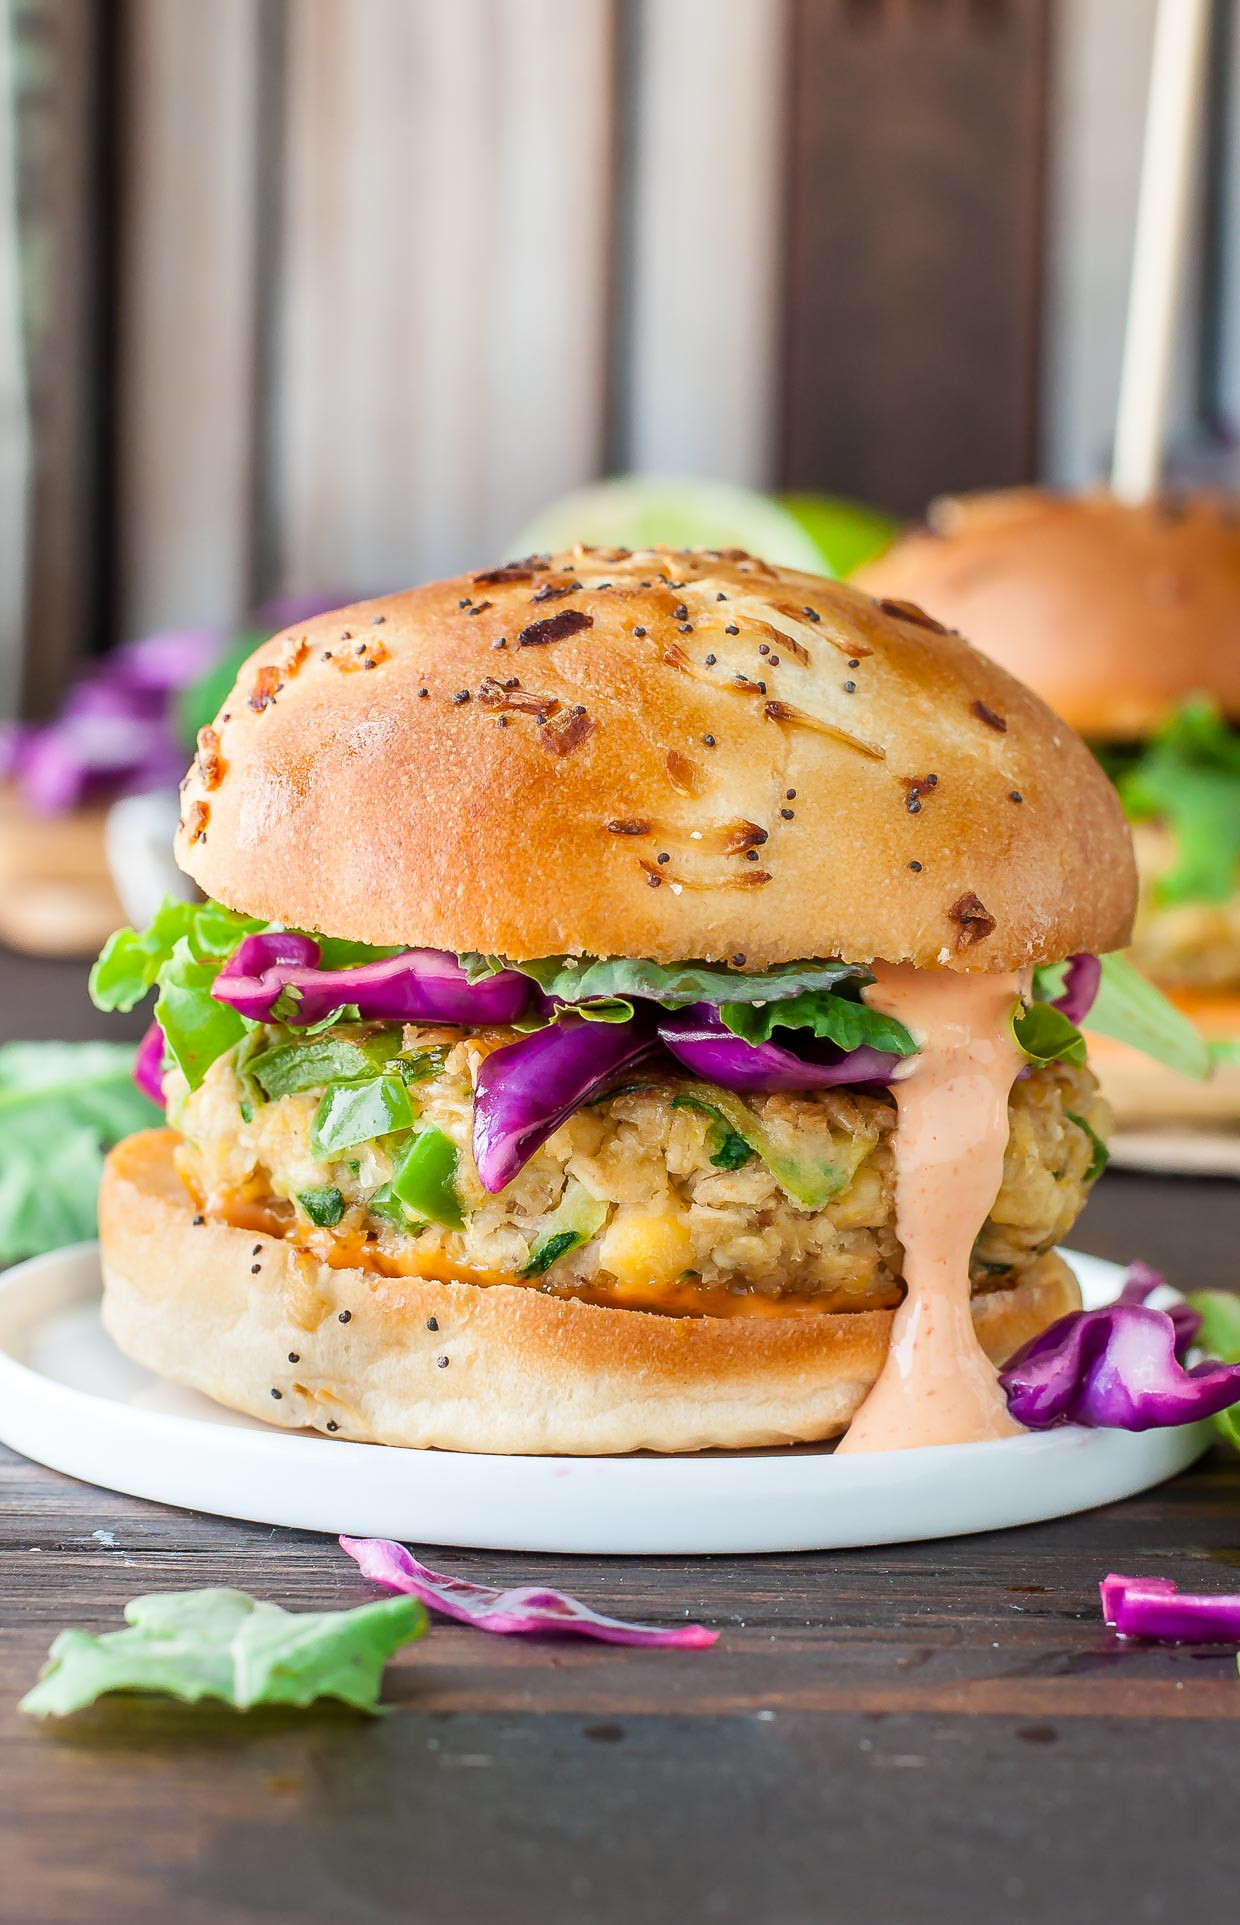 Vegetarian Burgers Recipes
 Spicy Chickpea Veggie Burgers with Jalapeño and Zucchini